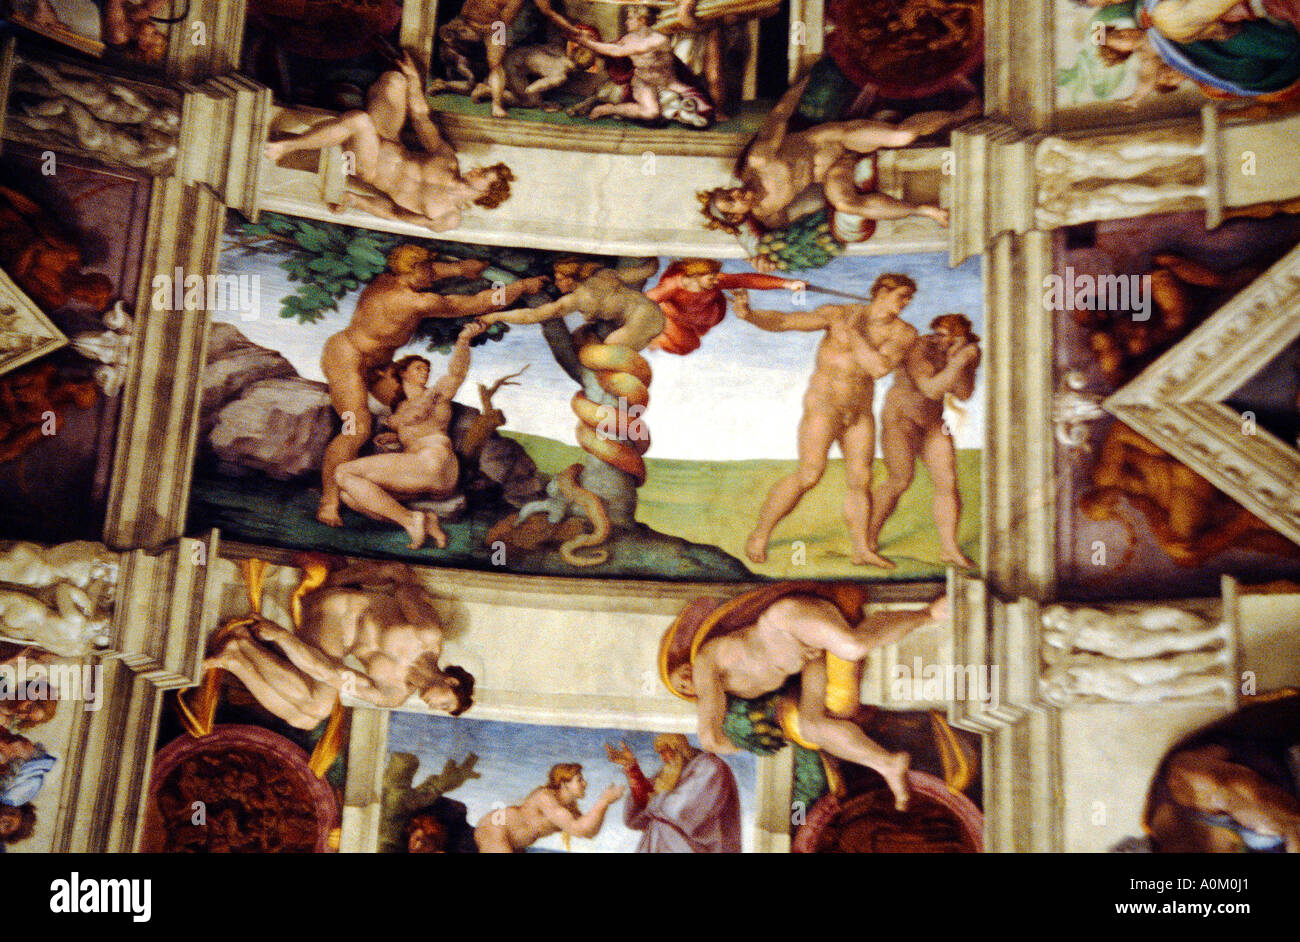 Rome Italy Adam & Eve Fresco Sistine Chapel Ceiling - The Fall of Man & Expulsion from Eden Stock Photo